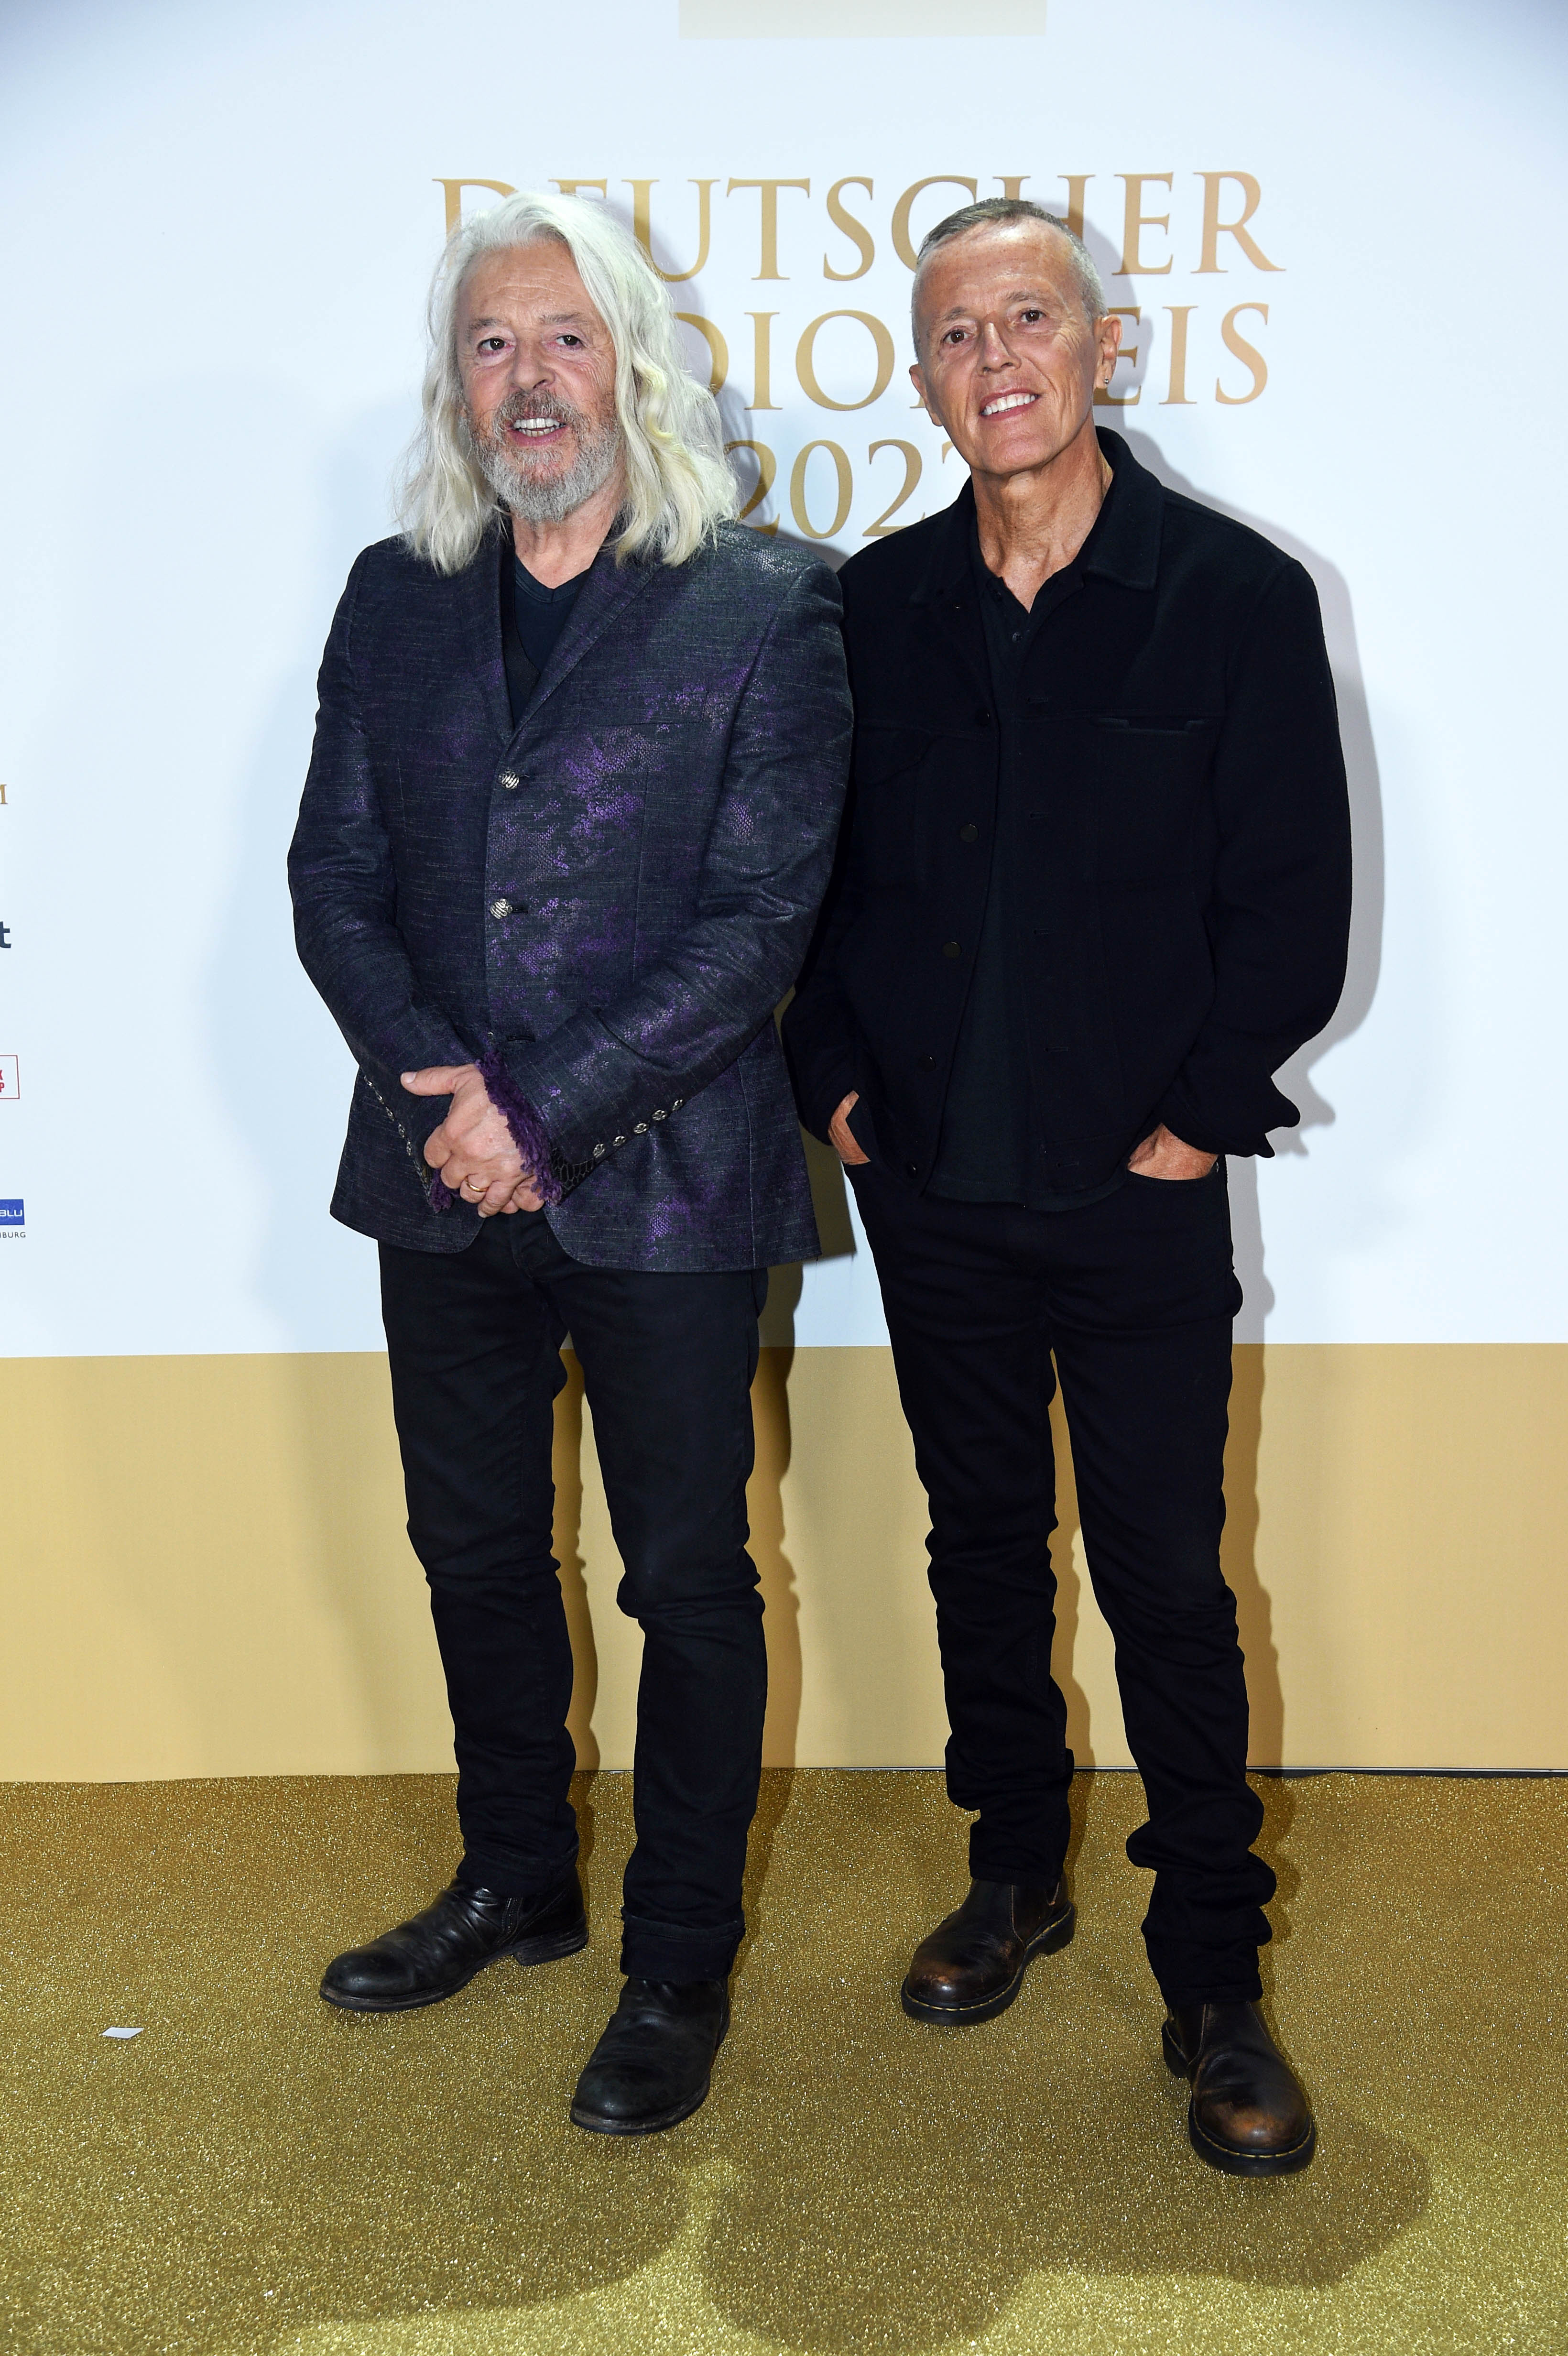 Curt Smith and Roland Orzabal have aged gracefully since their heyday